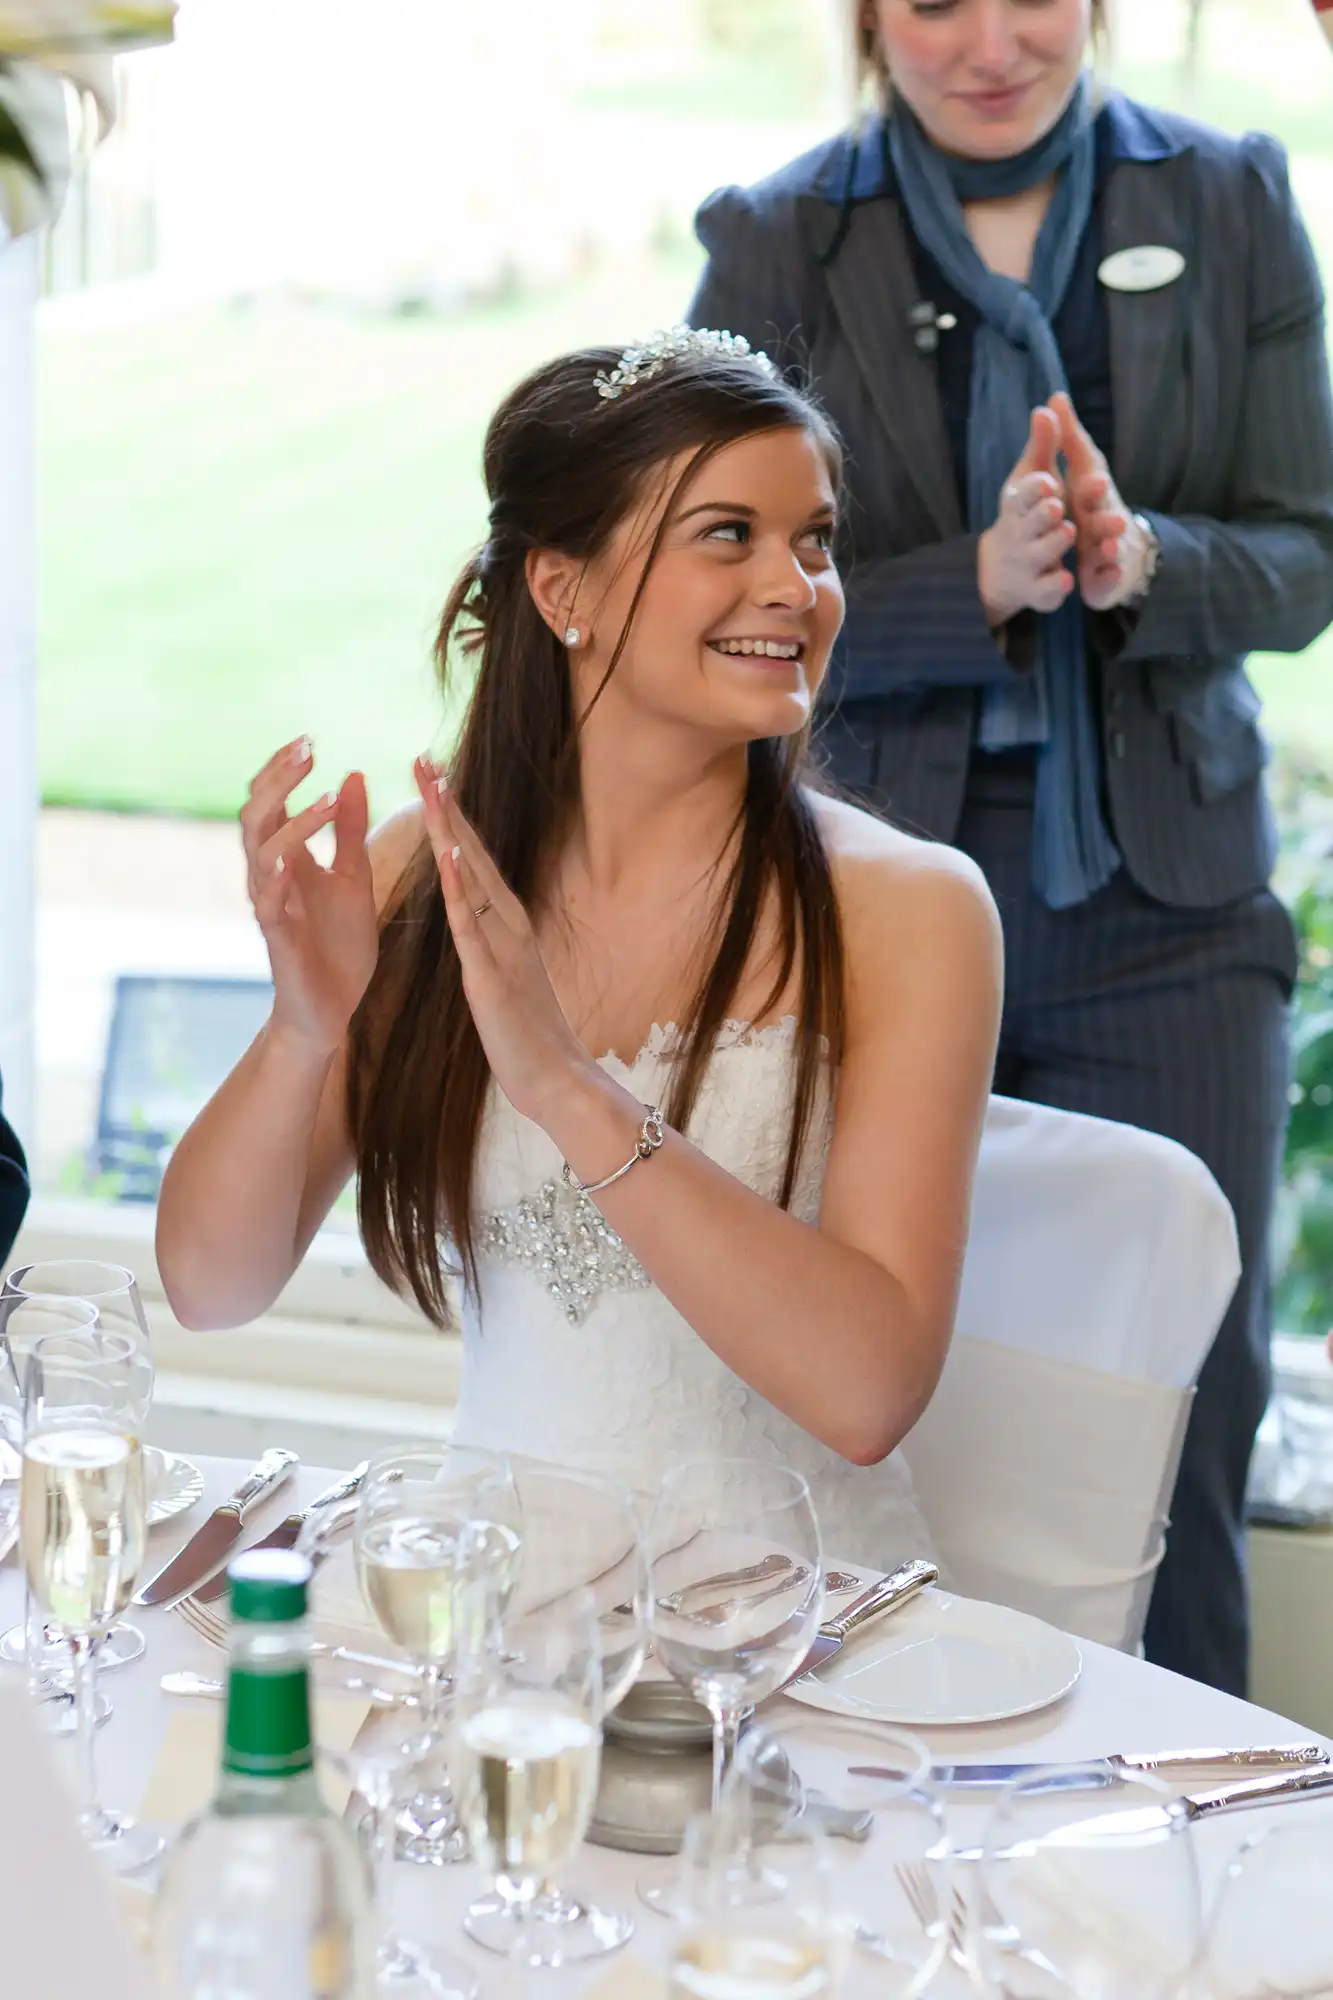 A bride in a white dress, seated and clapping at a table during a wedding reception, with a smiling expression and a server in the background.